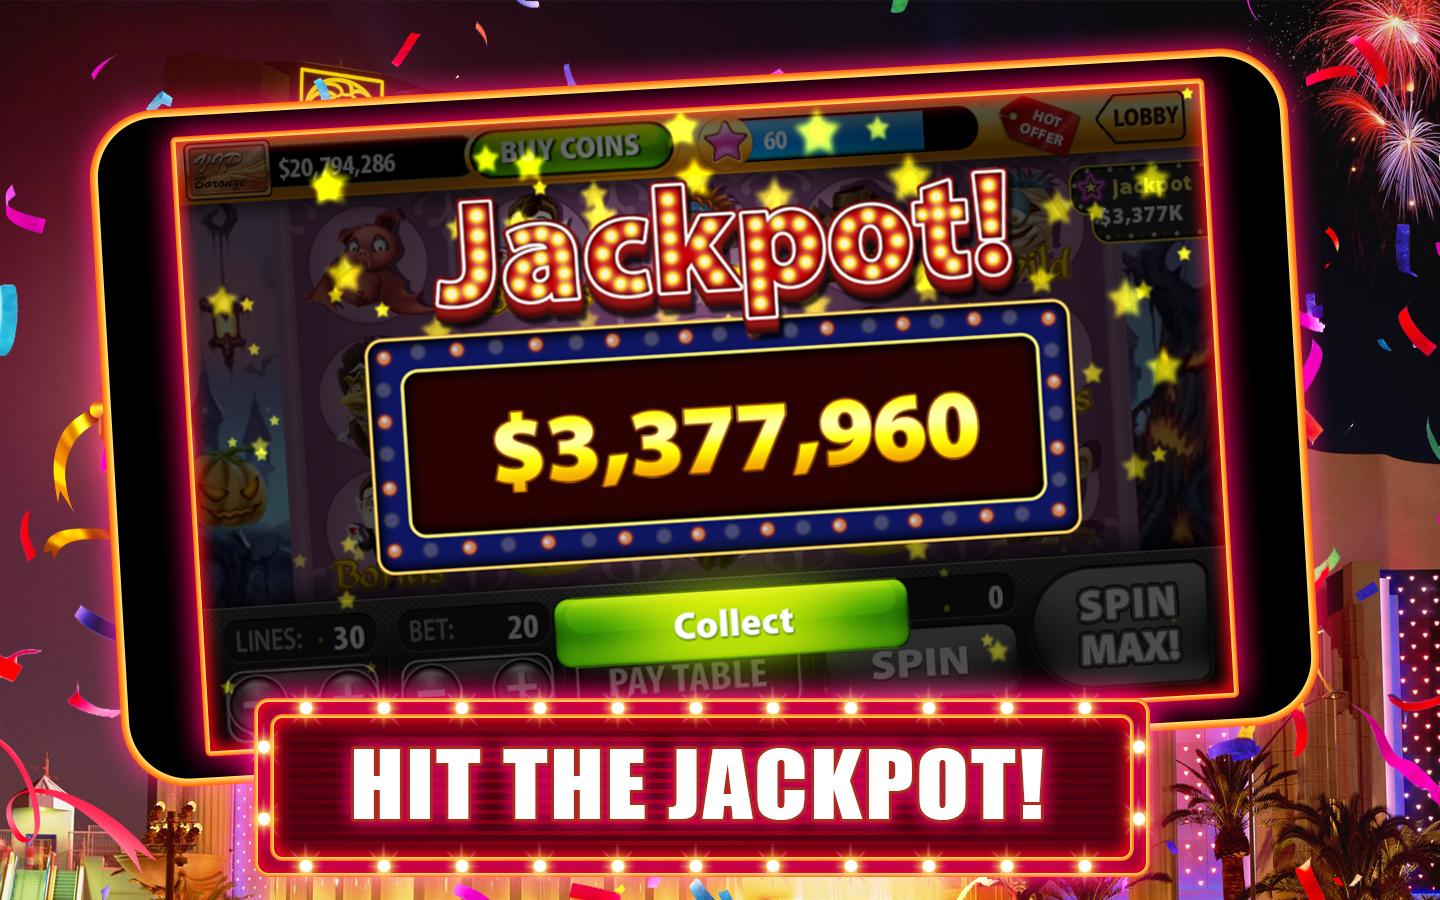 How To Win Jackpots On Slot Machines